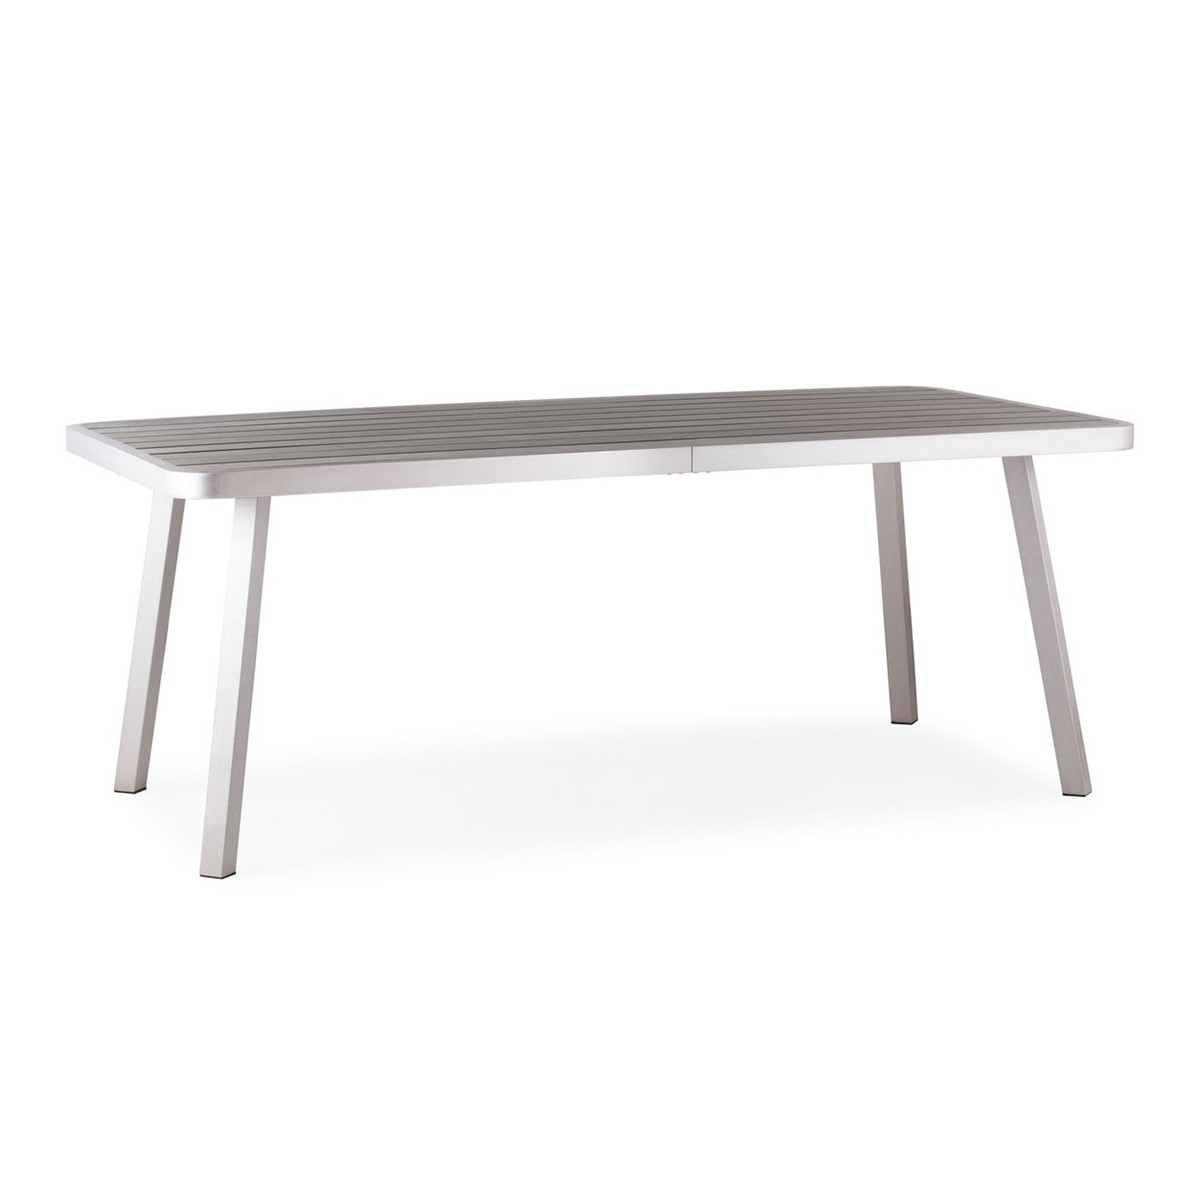 Zuo Modern Township Dining Long Table - Brushed Aluminum